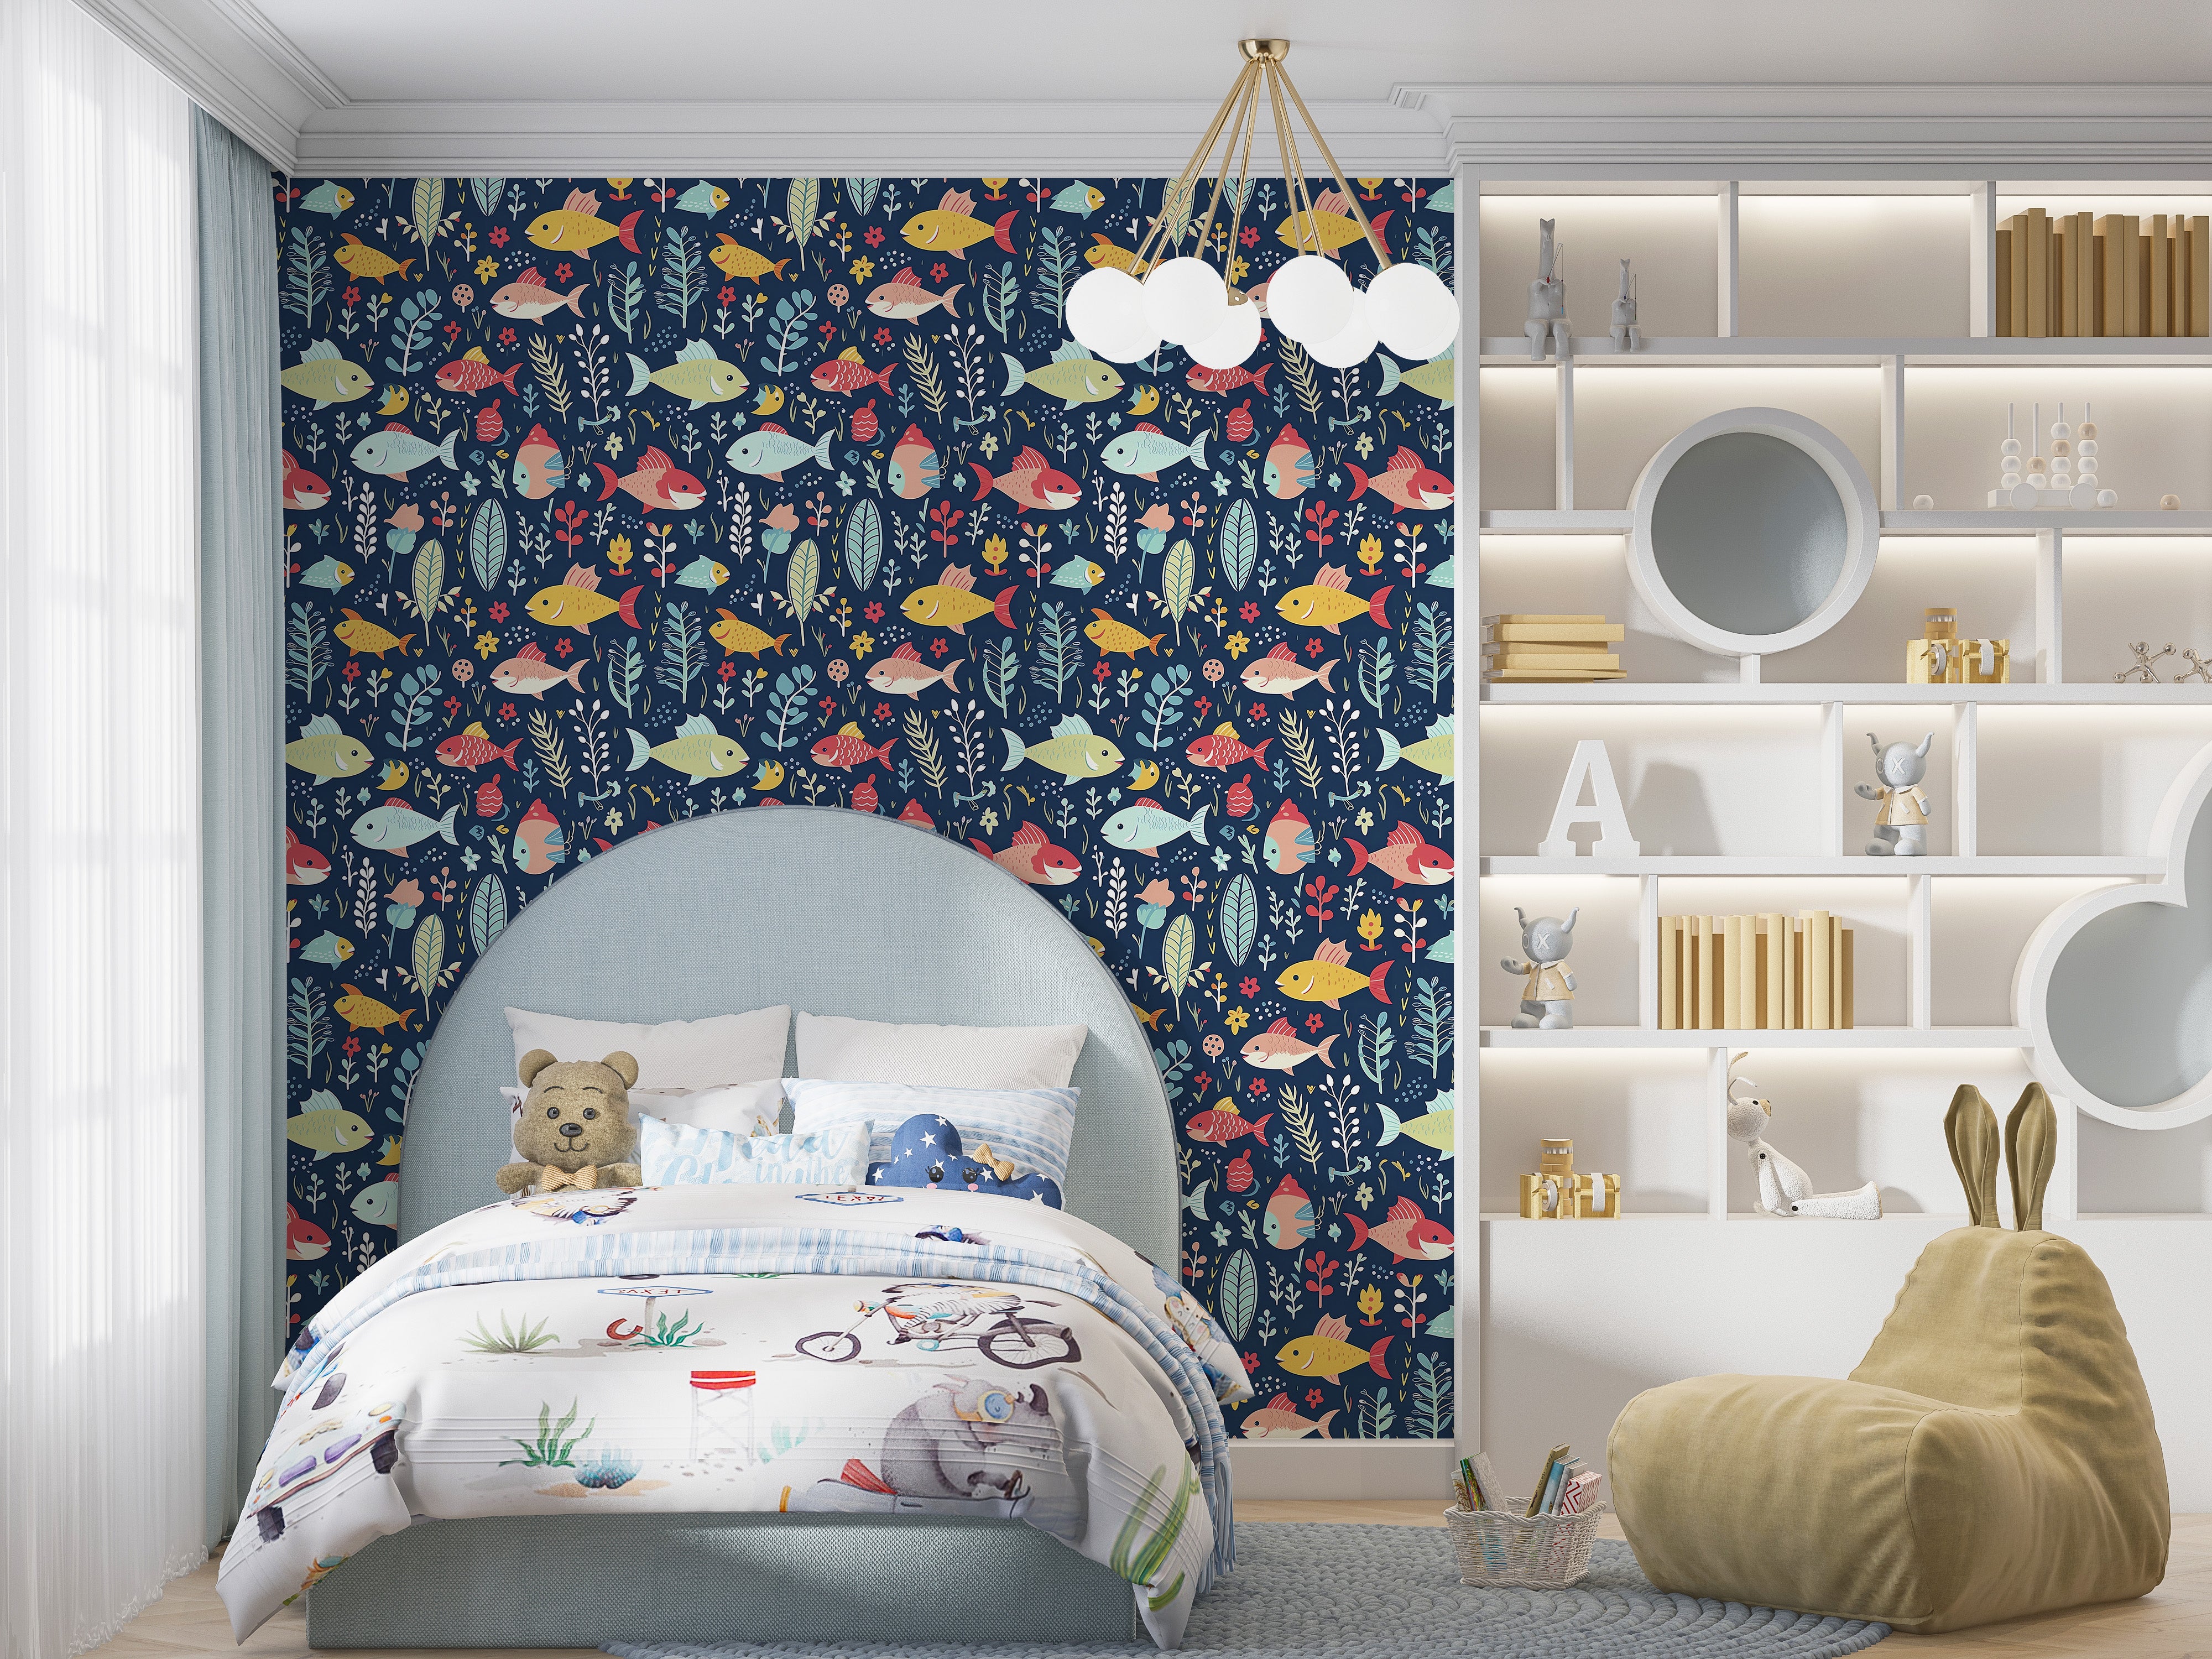 Explore Oceanic Wonders with Removable Wallpaper